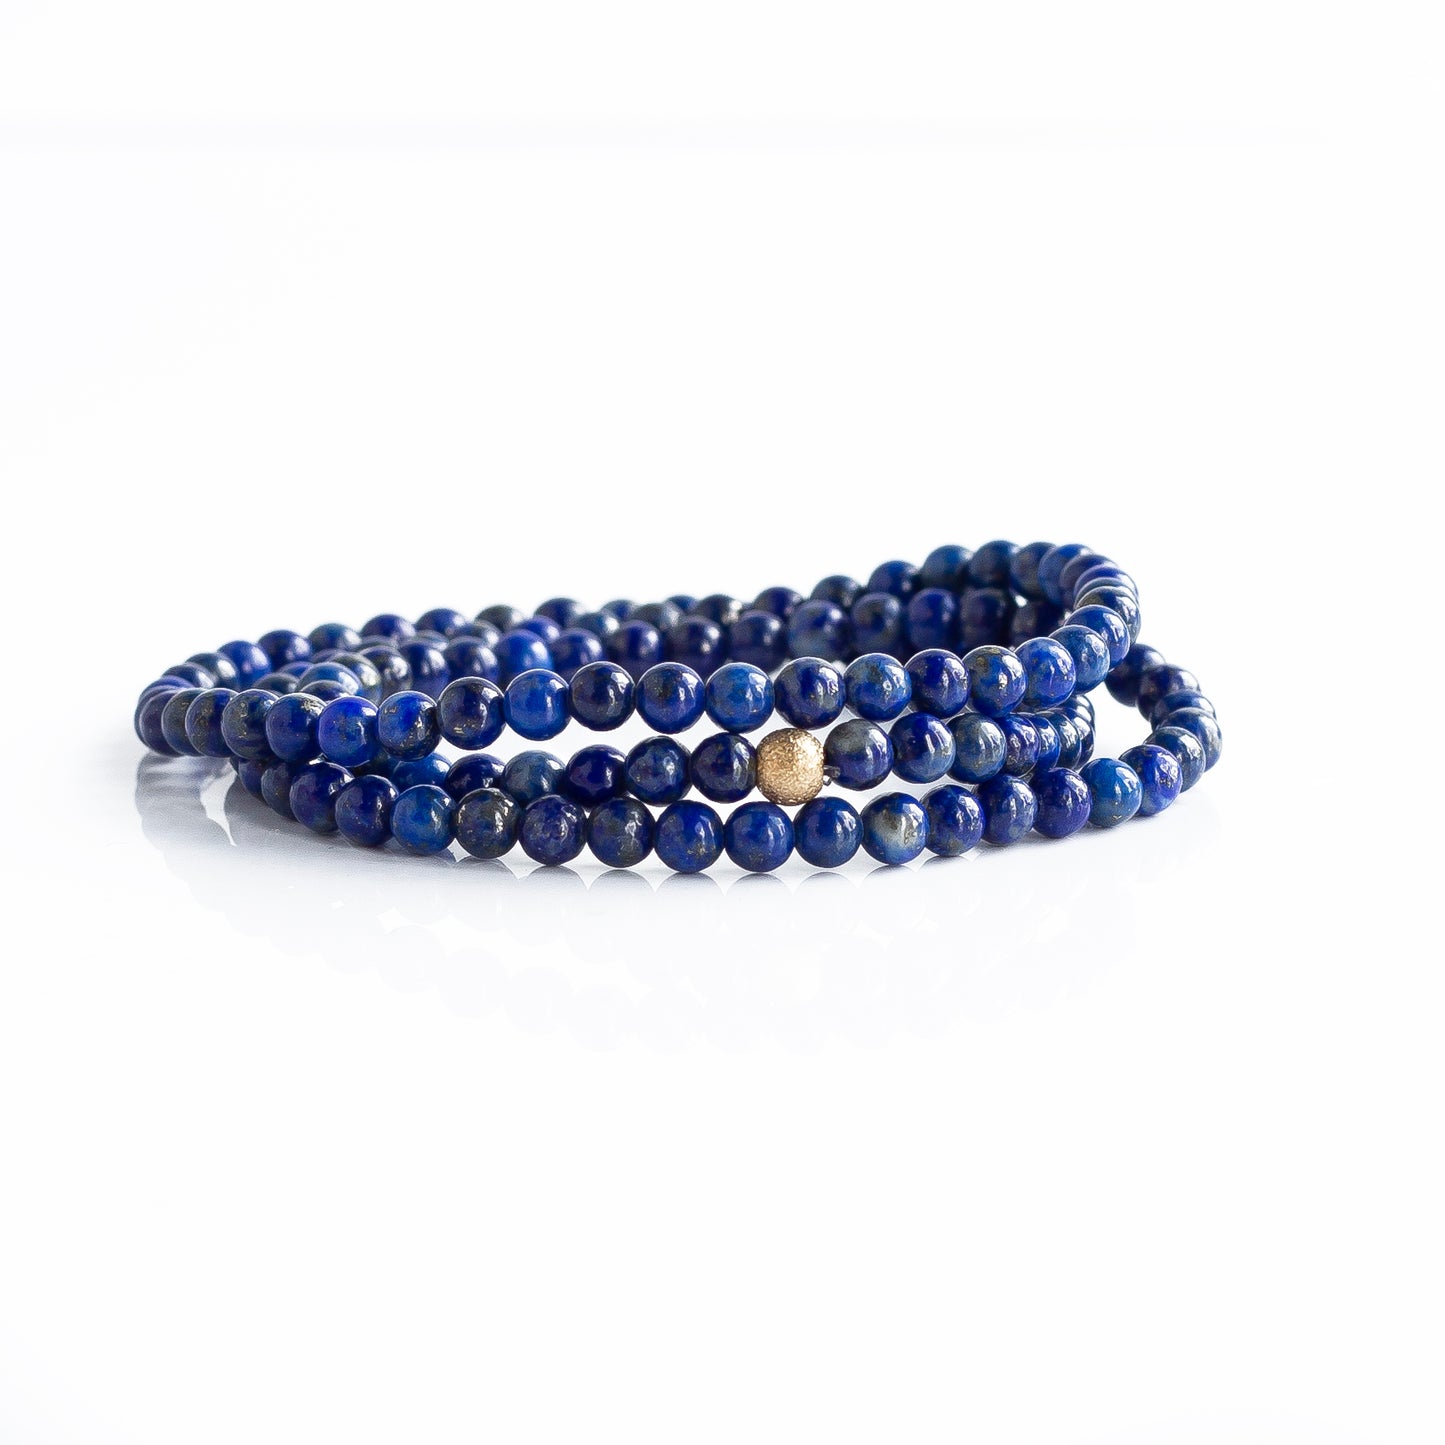 Blue Agate Gemstone Bracelet With Healing Healing Crystal Bracelets MG1516  3 Strand For Women, Negative Energy Protection Jewelry From Ai828, $21.47 |  DHgate.Com